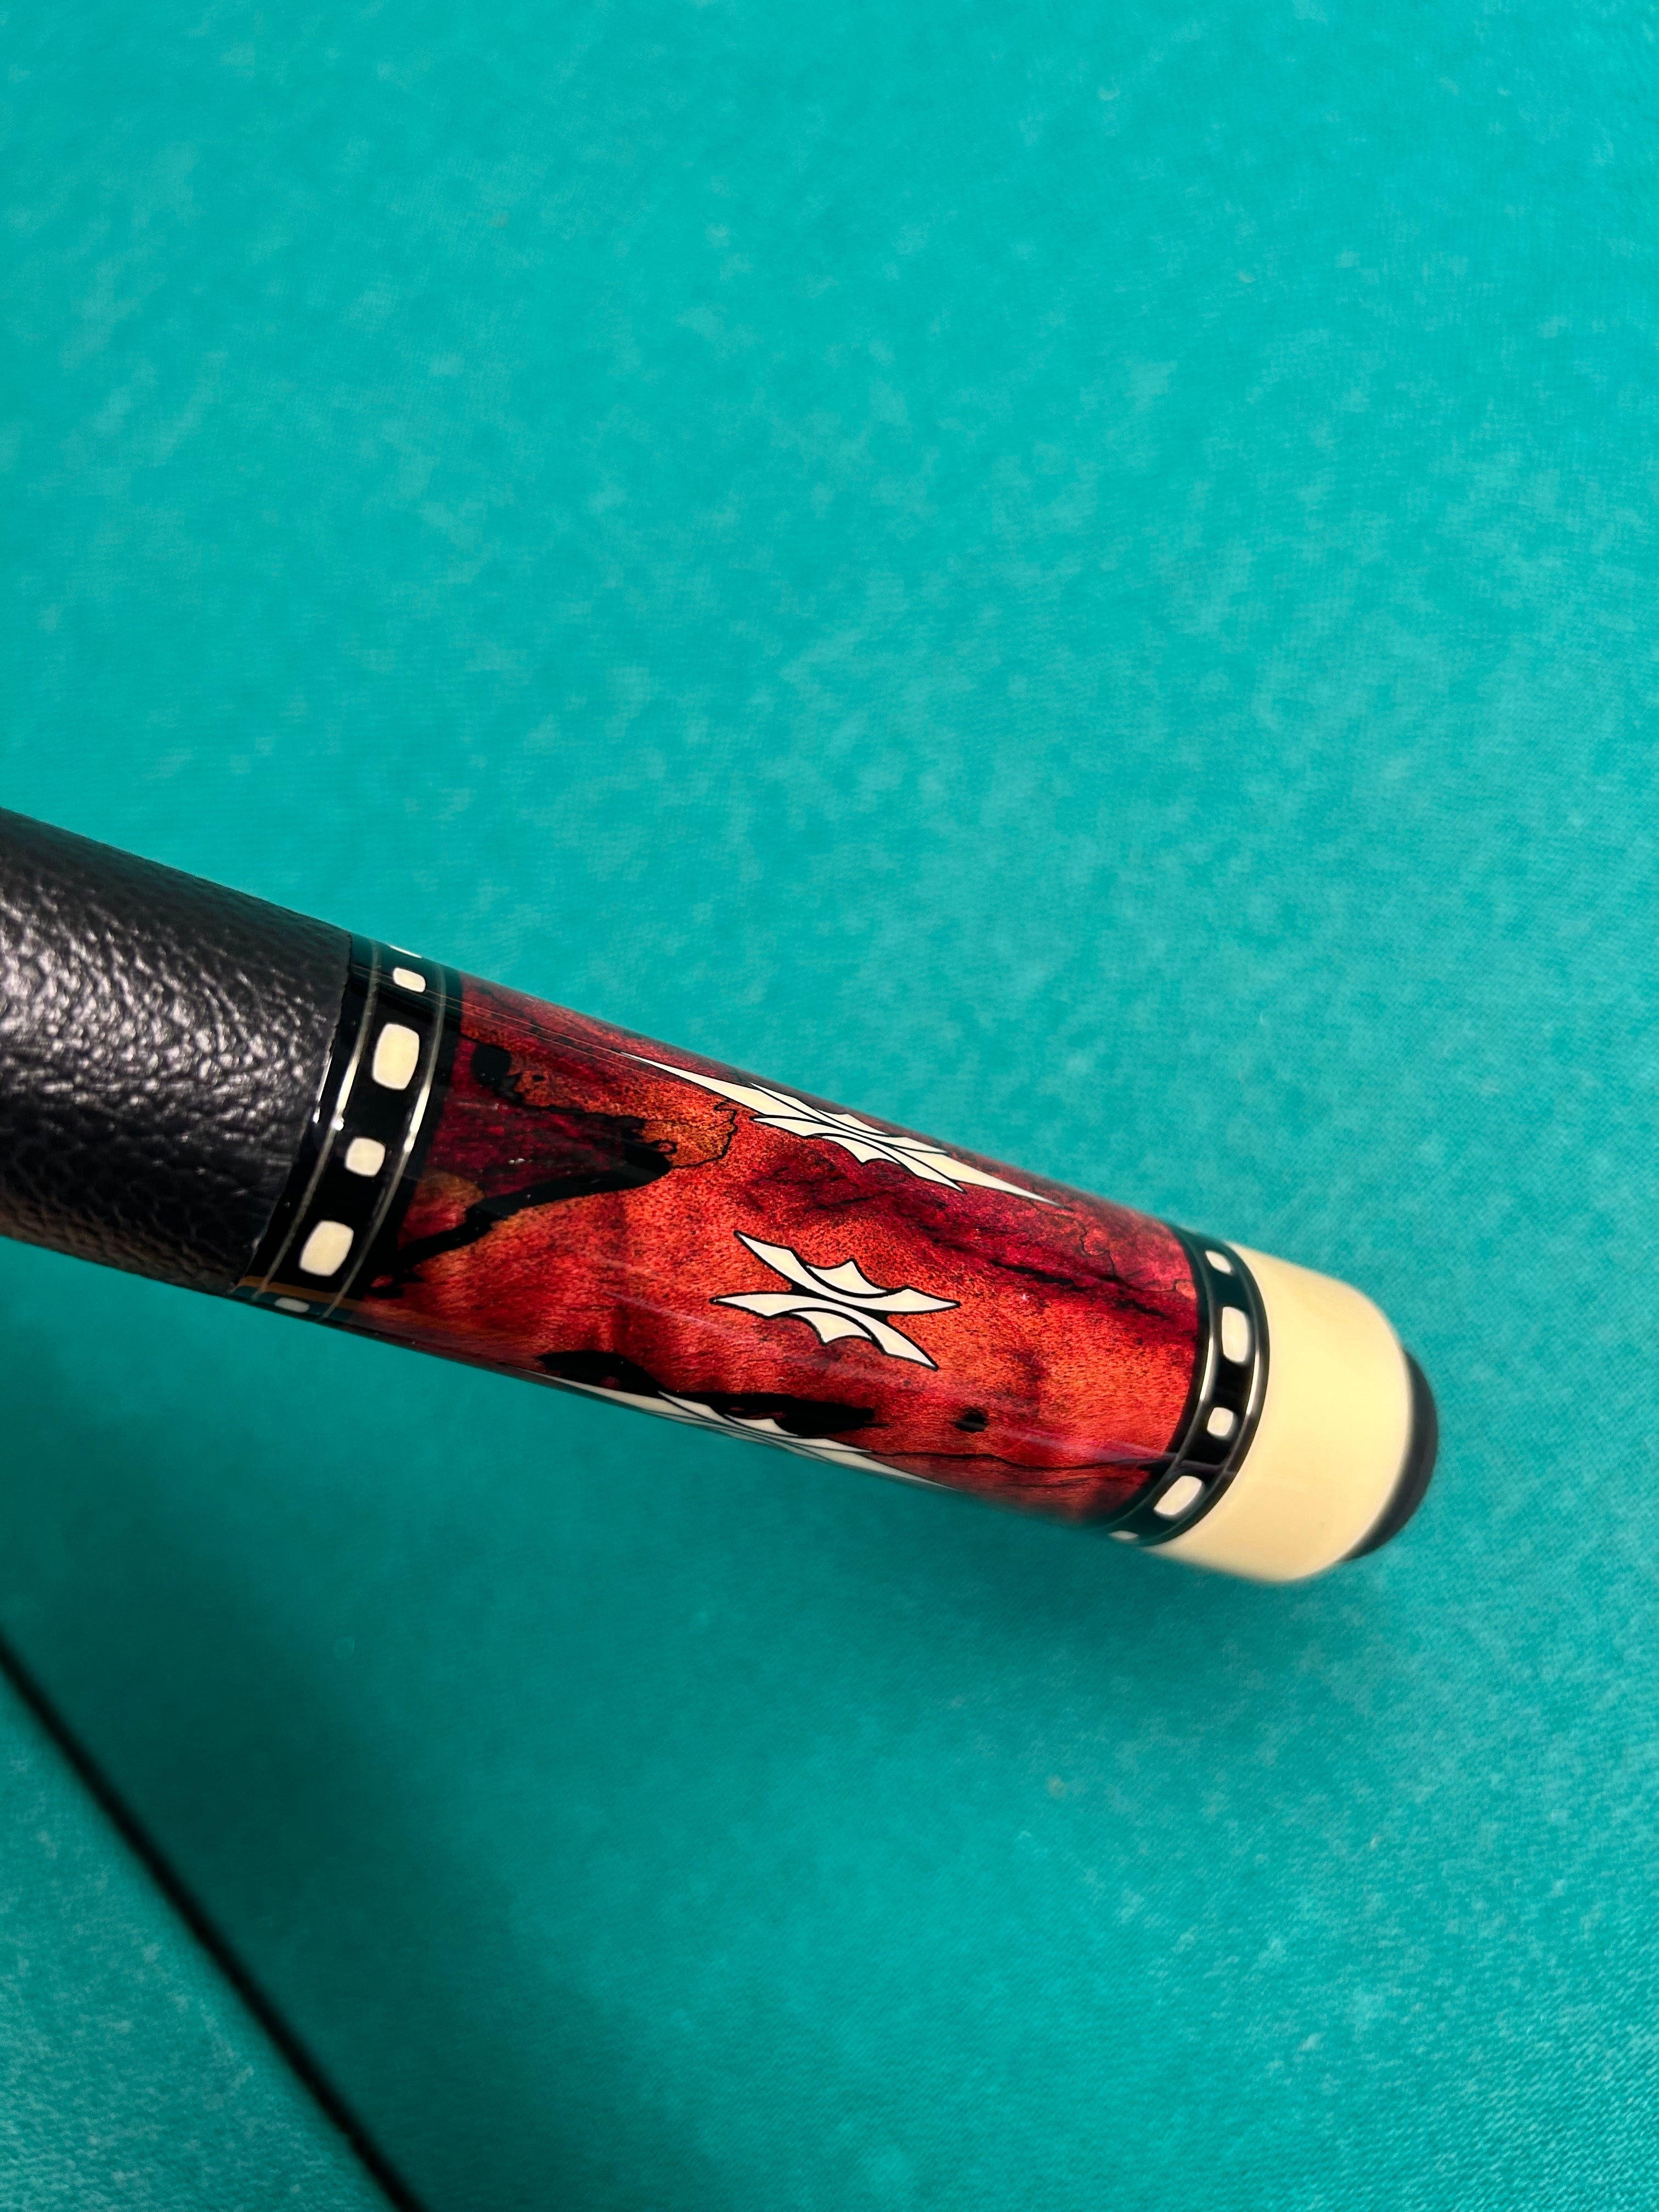 AE (Artistic Engineering)6 Point Cue